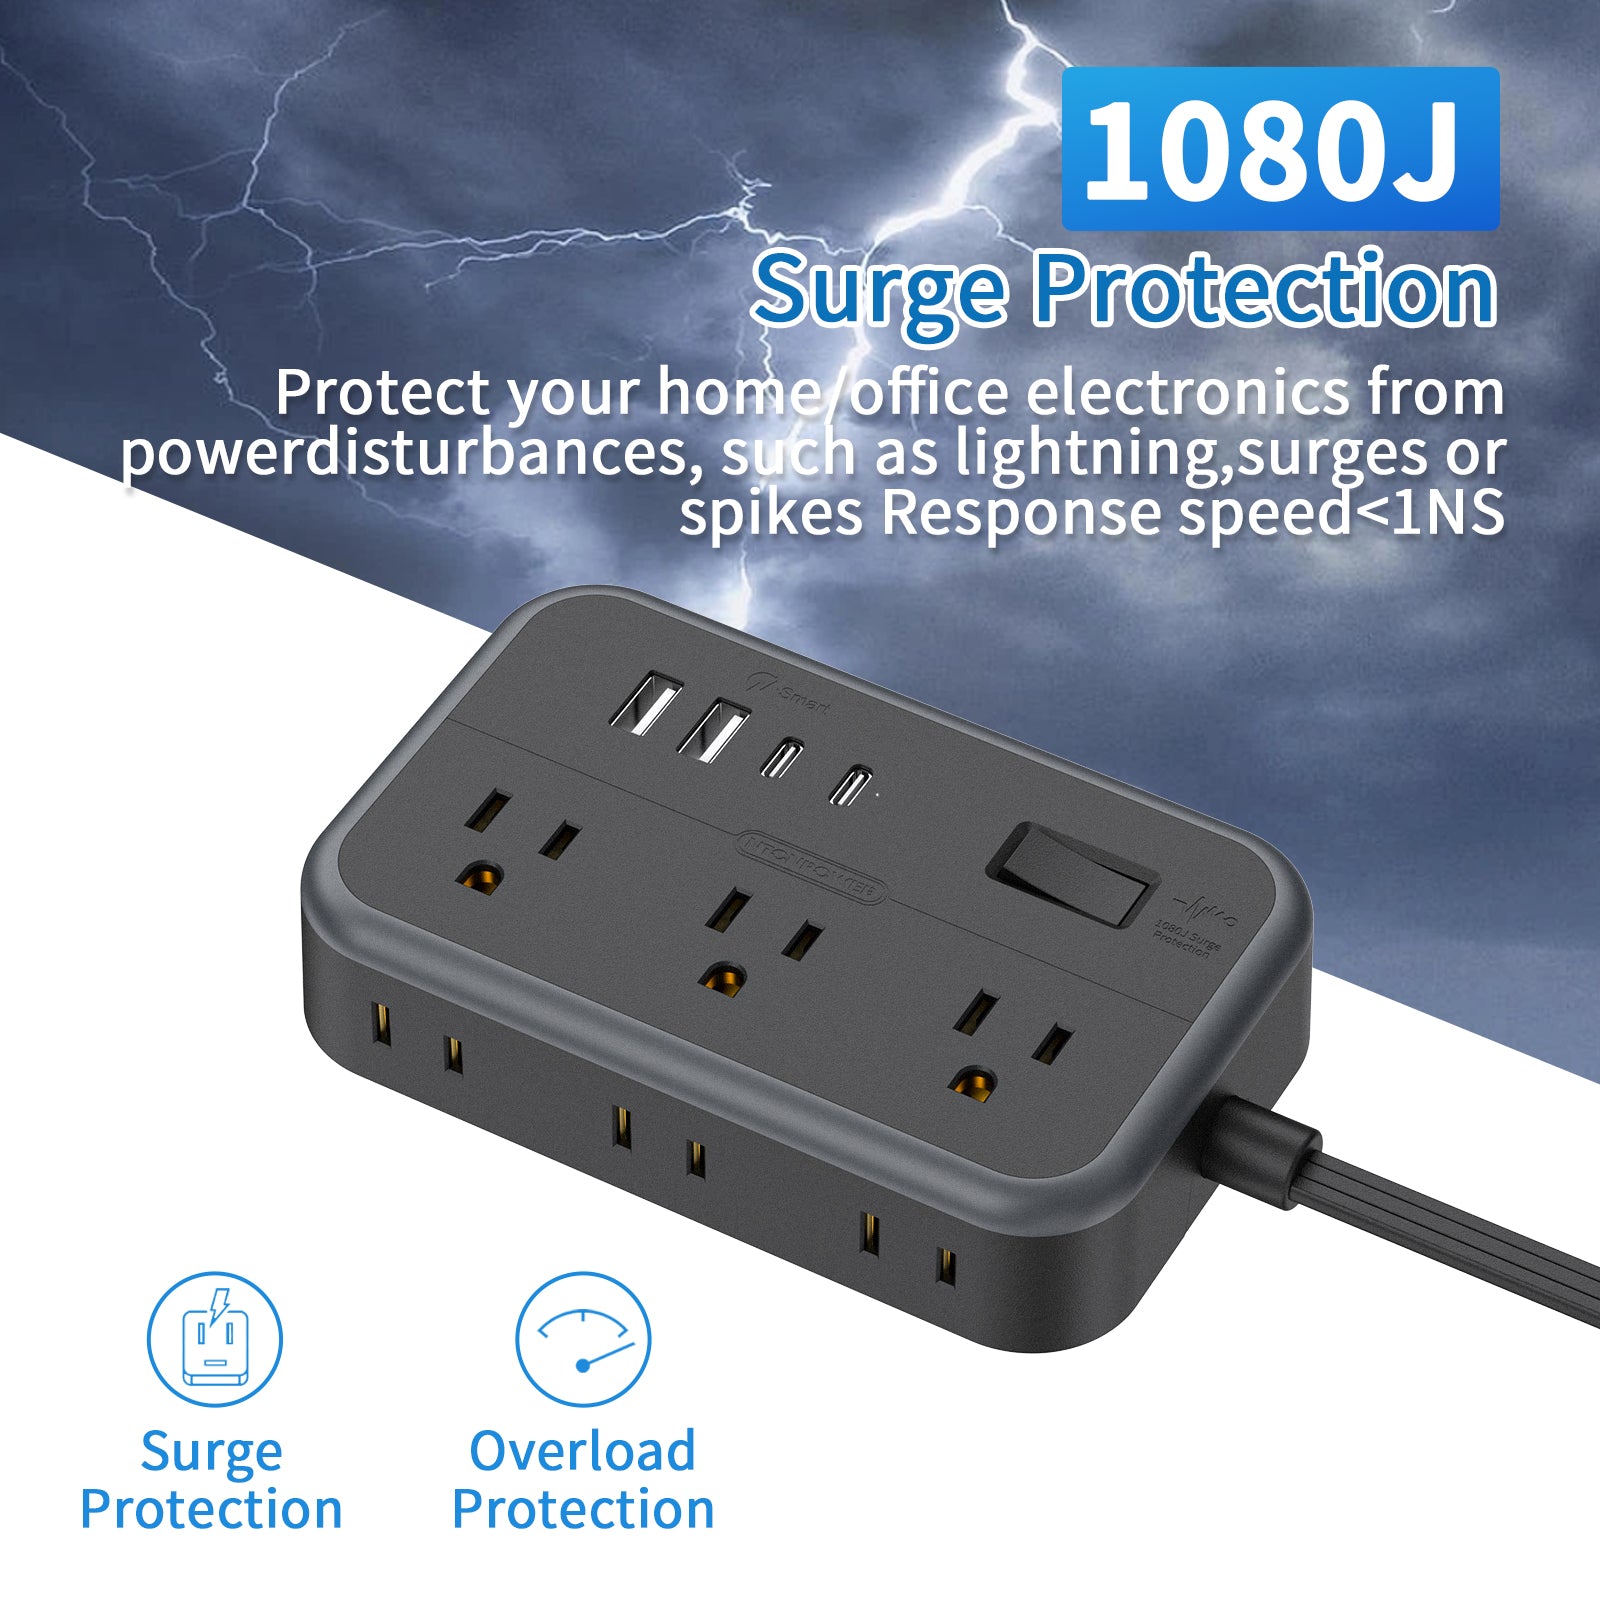 Ntonpower New Surge Protector Power Strip Tower 12 Outlets 2 USB-A 2 USB-C